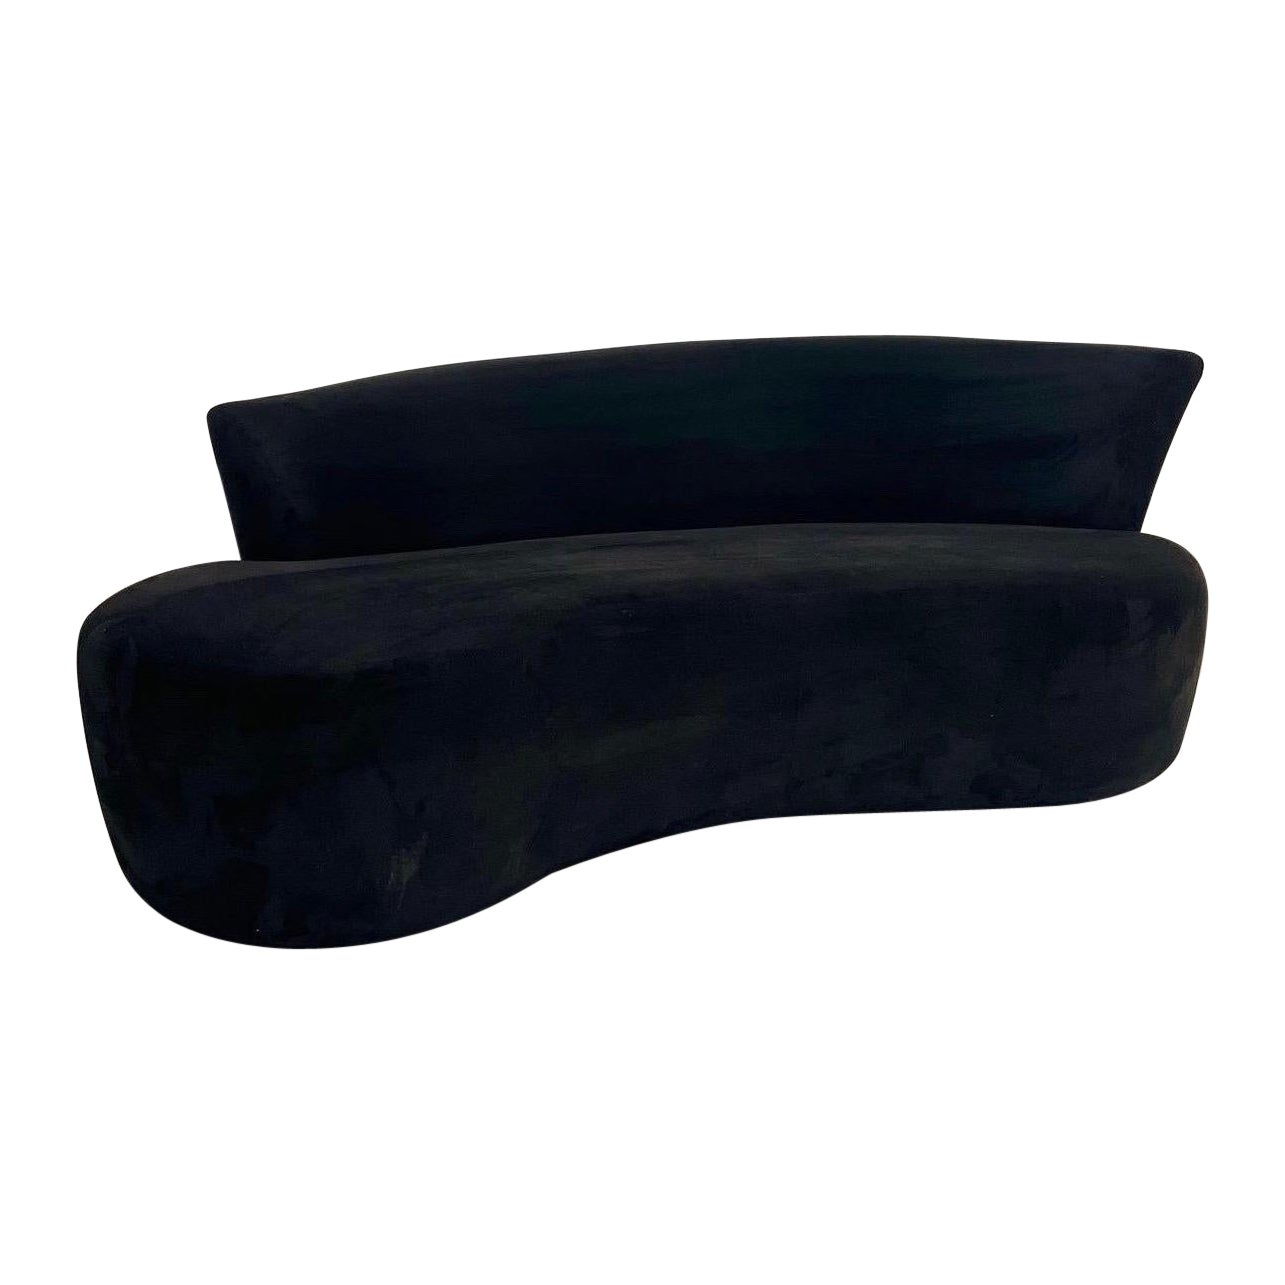 Vladimir Kagan Curved Black Sofa for Weiman / Preview